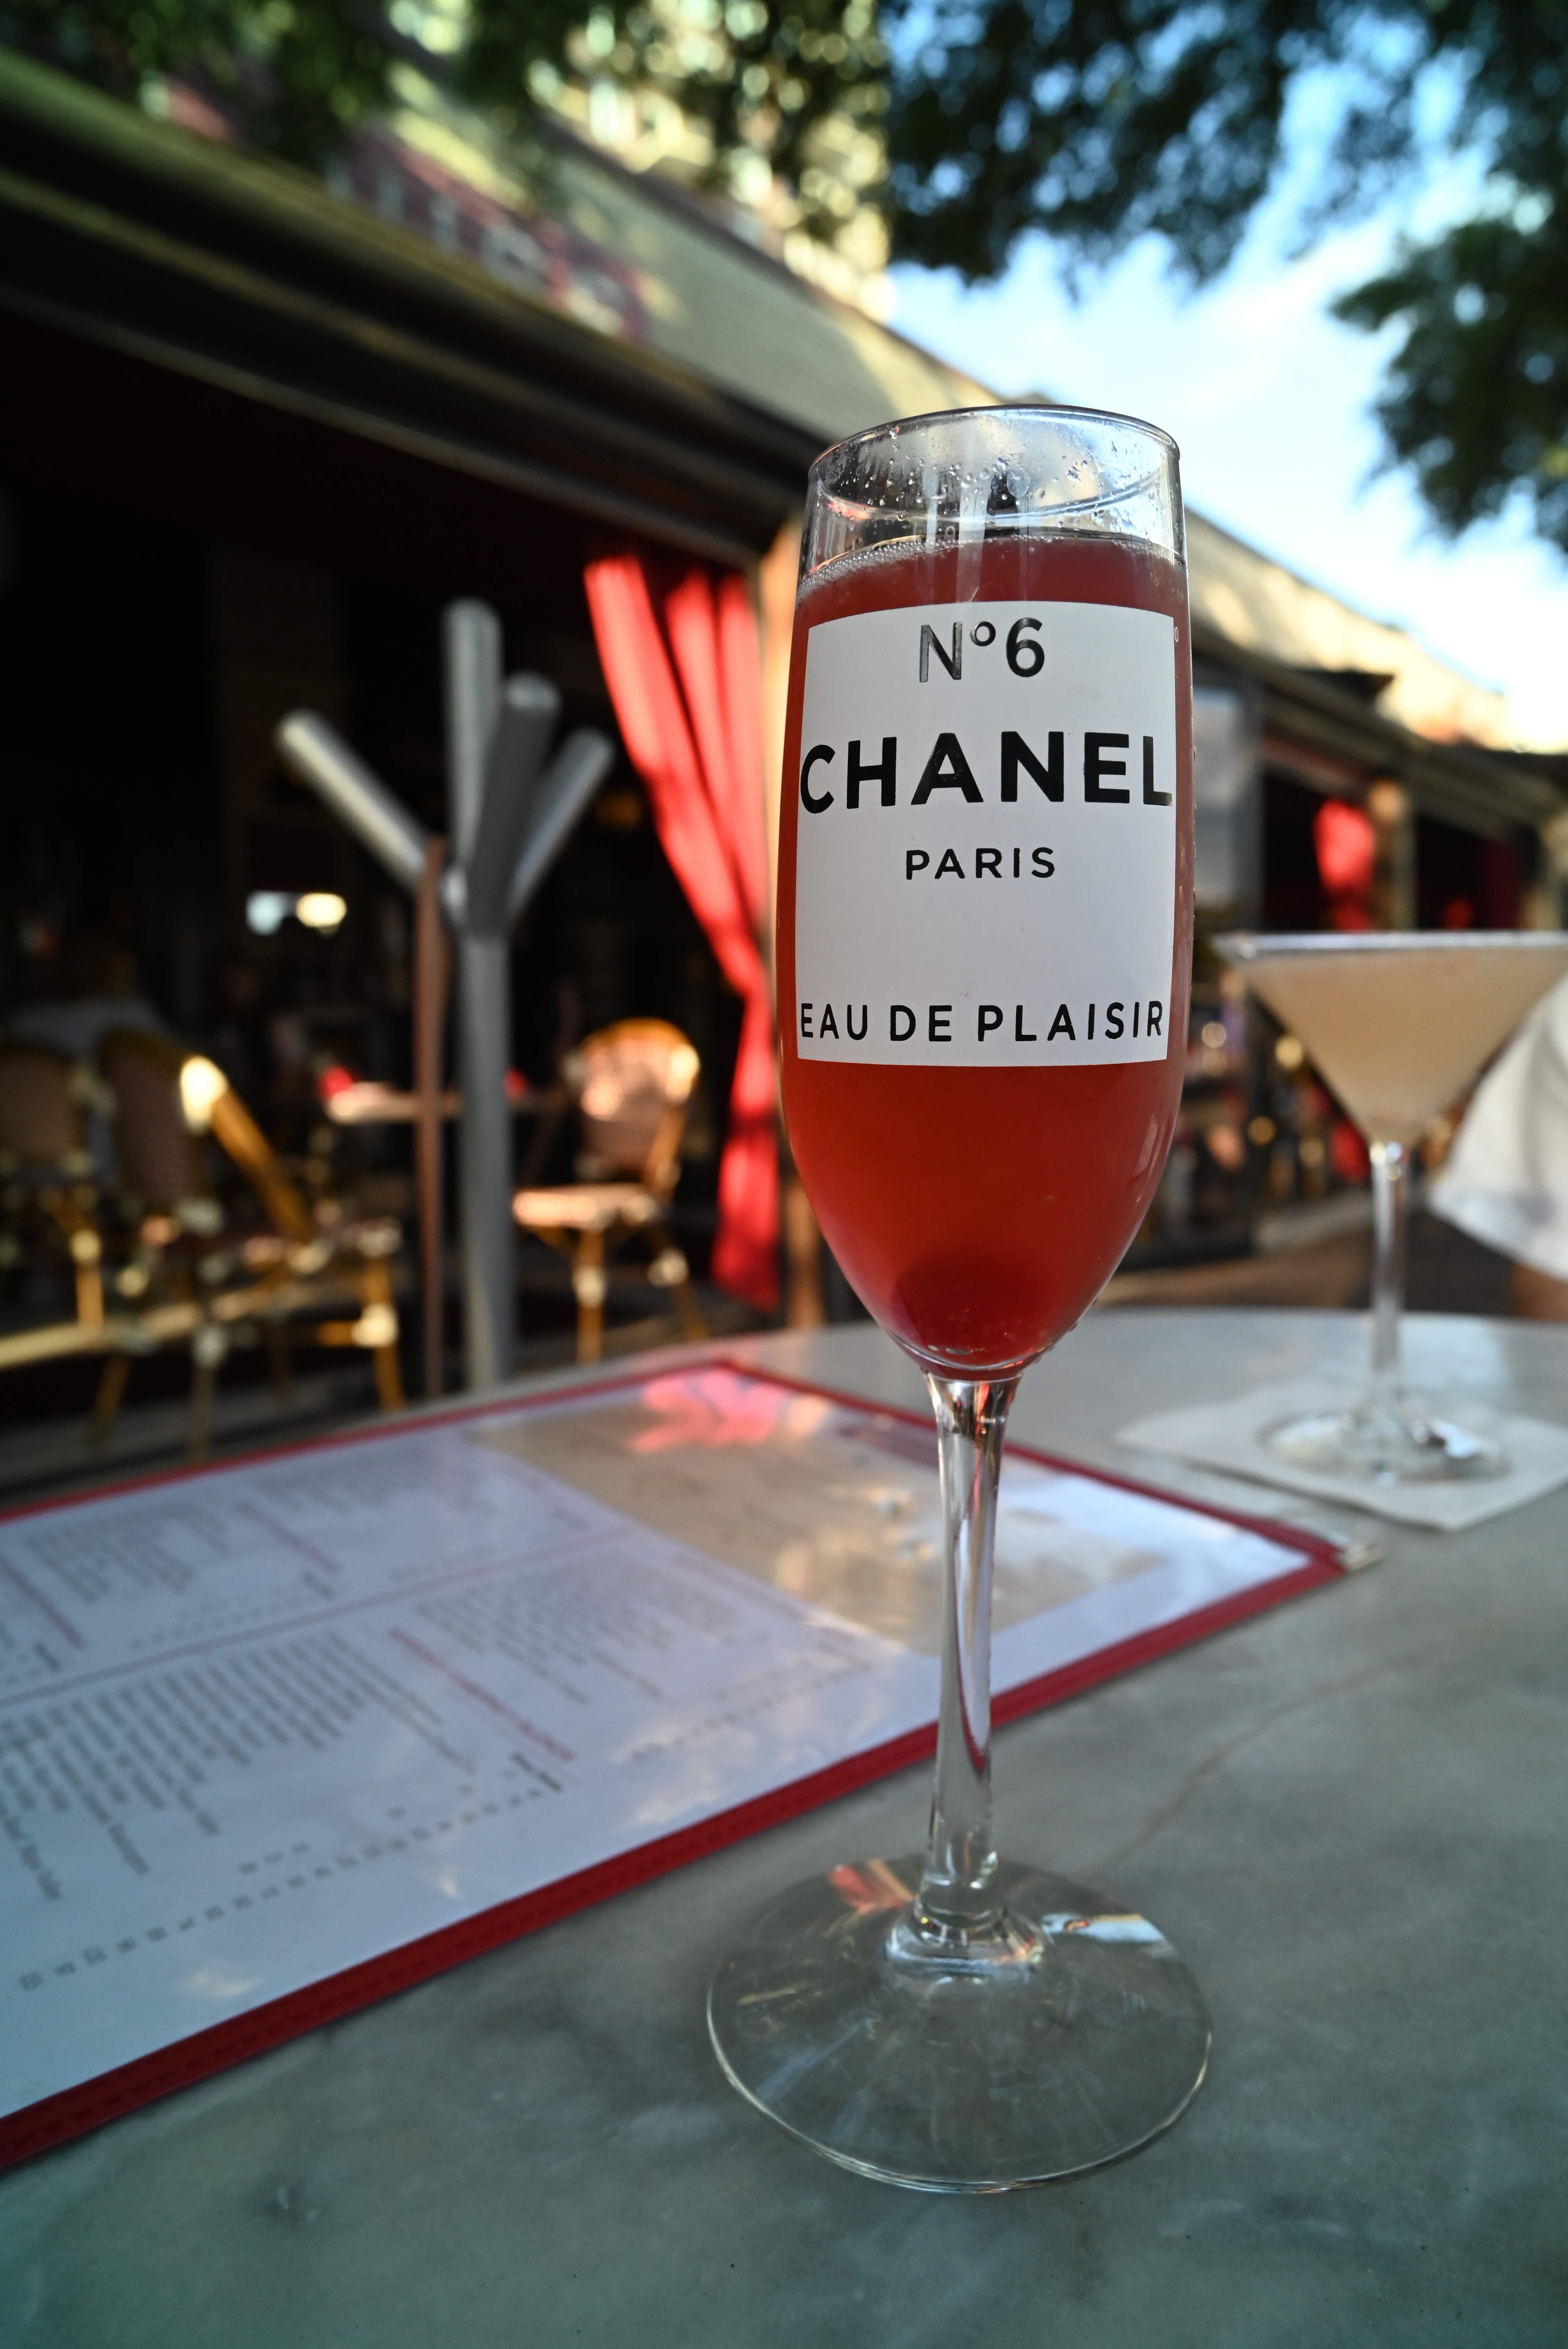 Chanel No. 6 - COCKTAILS & WINE BY THE GLASS - Toulouse Cafe and Bar -  French Restaurant in TX